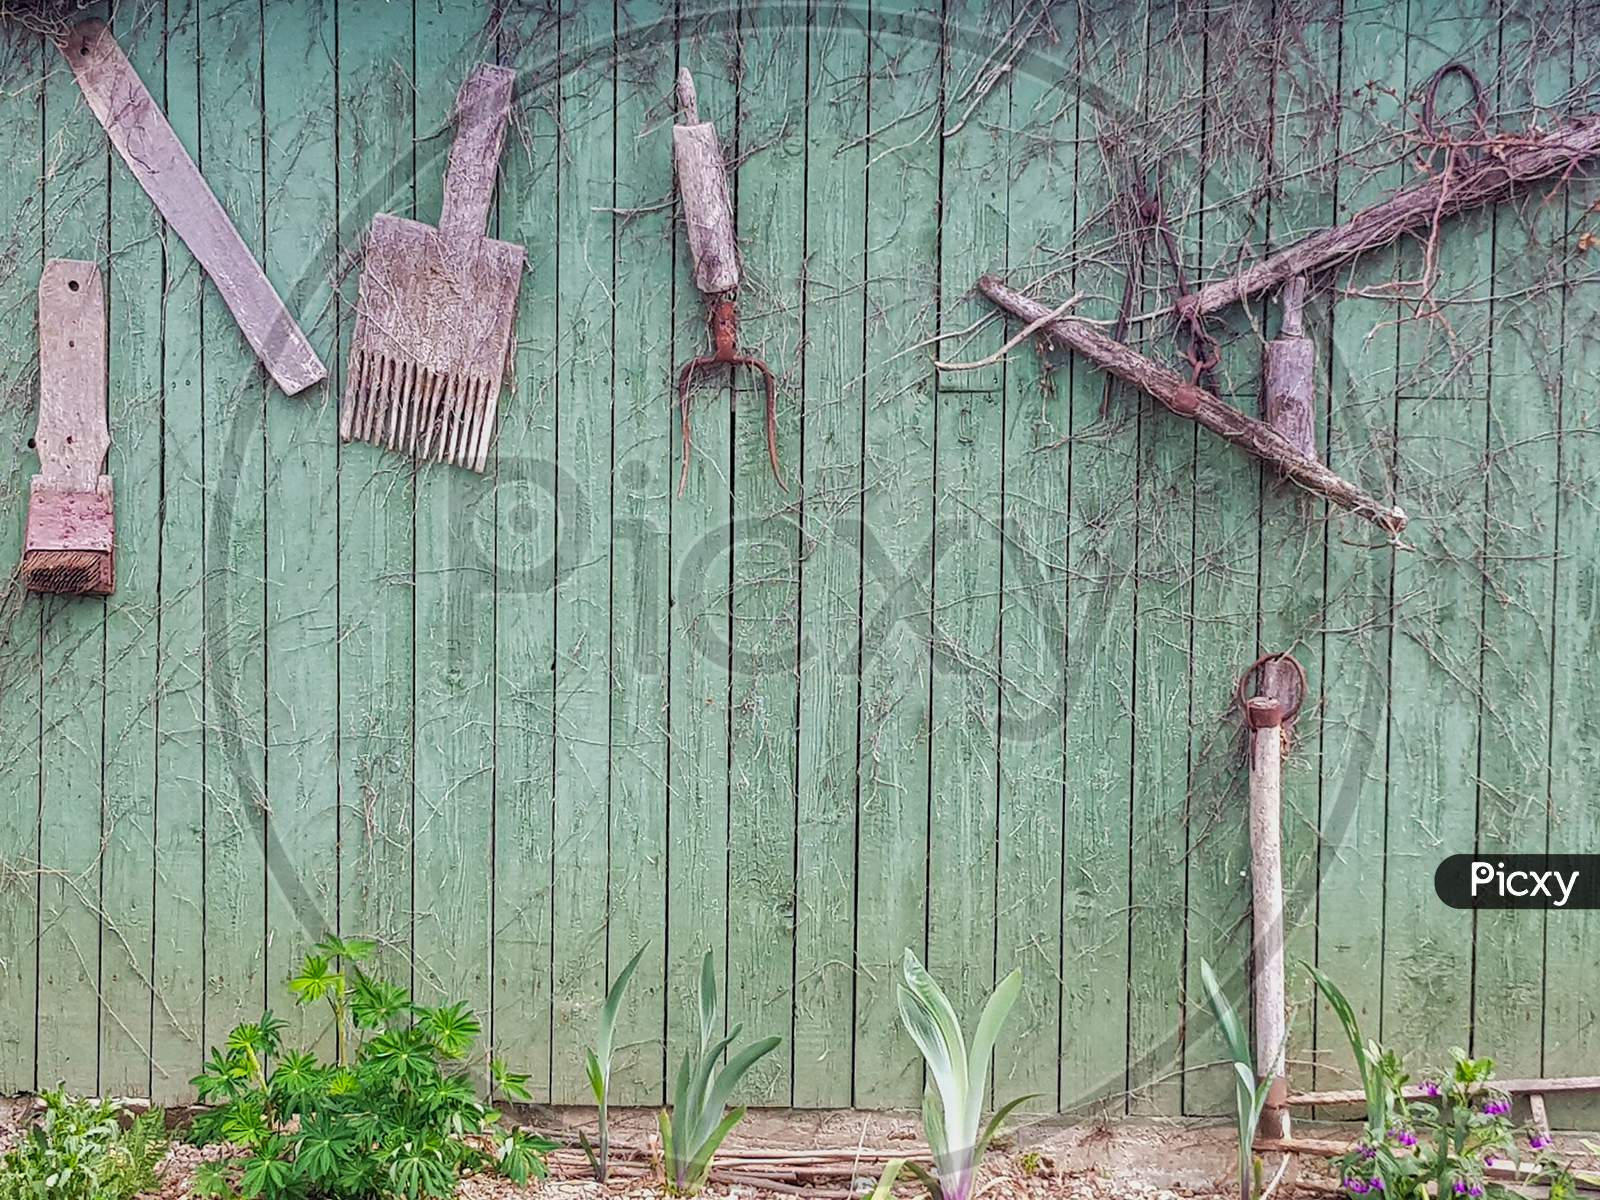 A Deceased Wall With Garden Tools Tagged in an House Garden